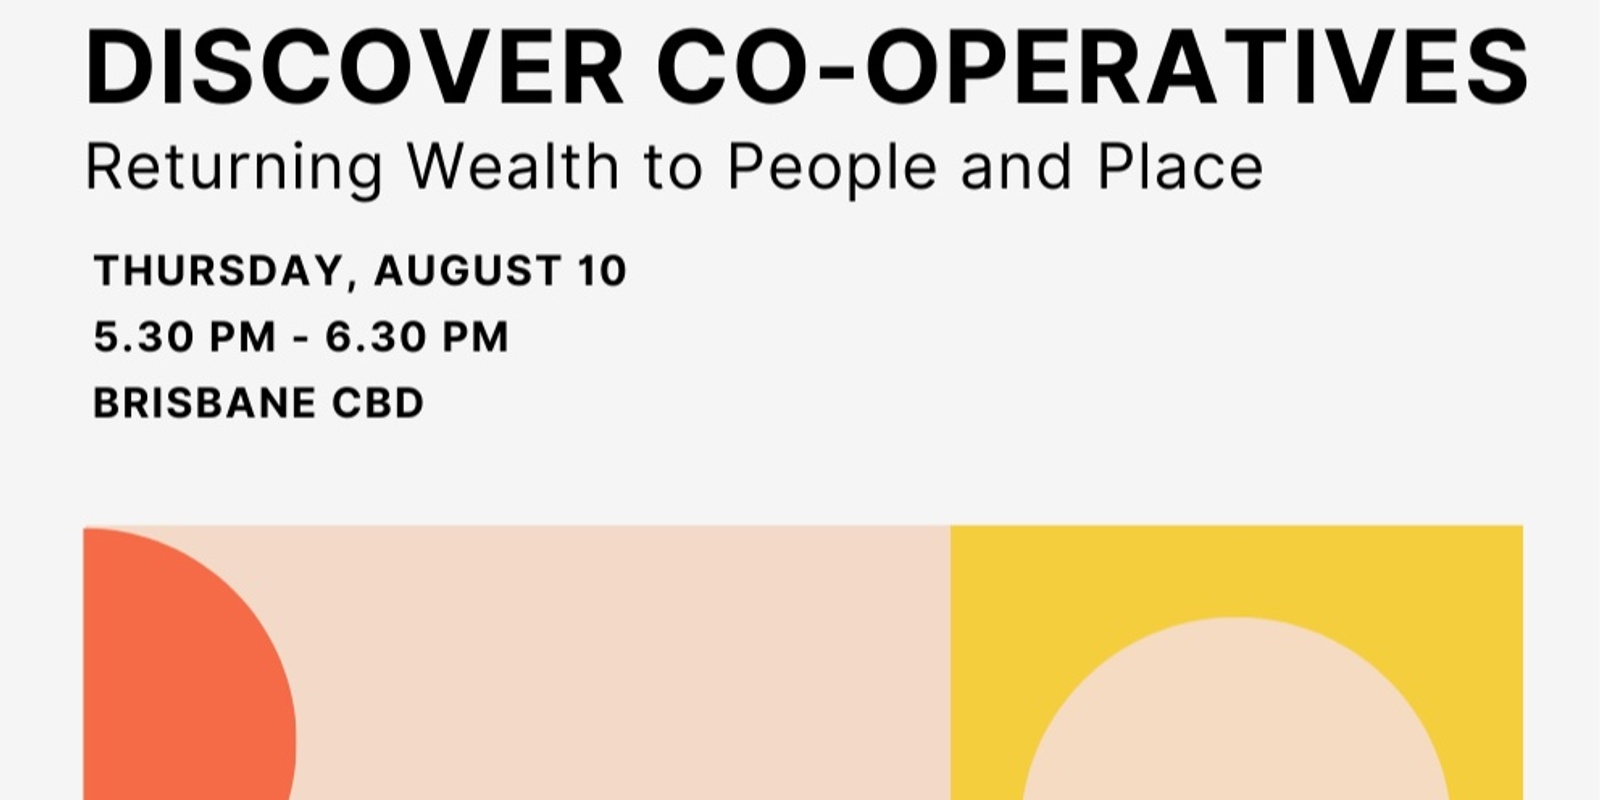 Discover Co-operatives - Returning Wealth to People and Place